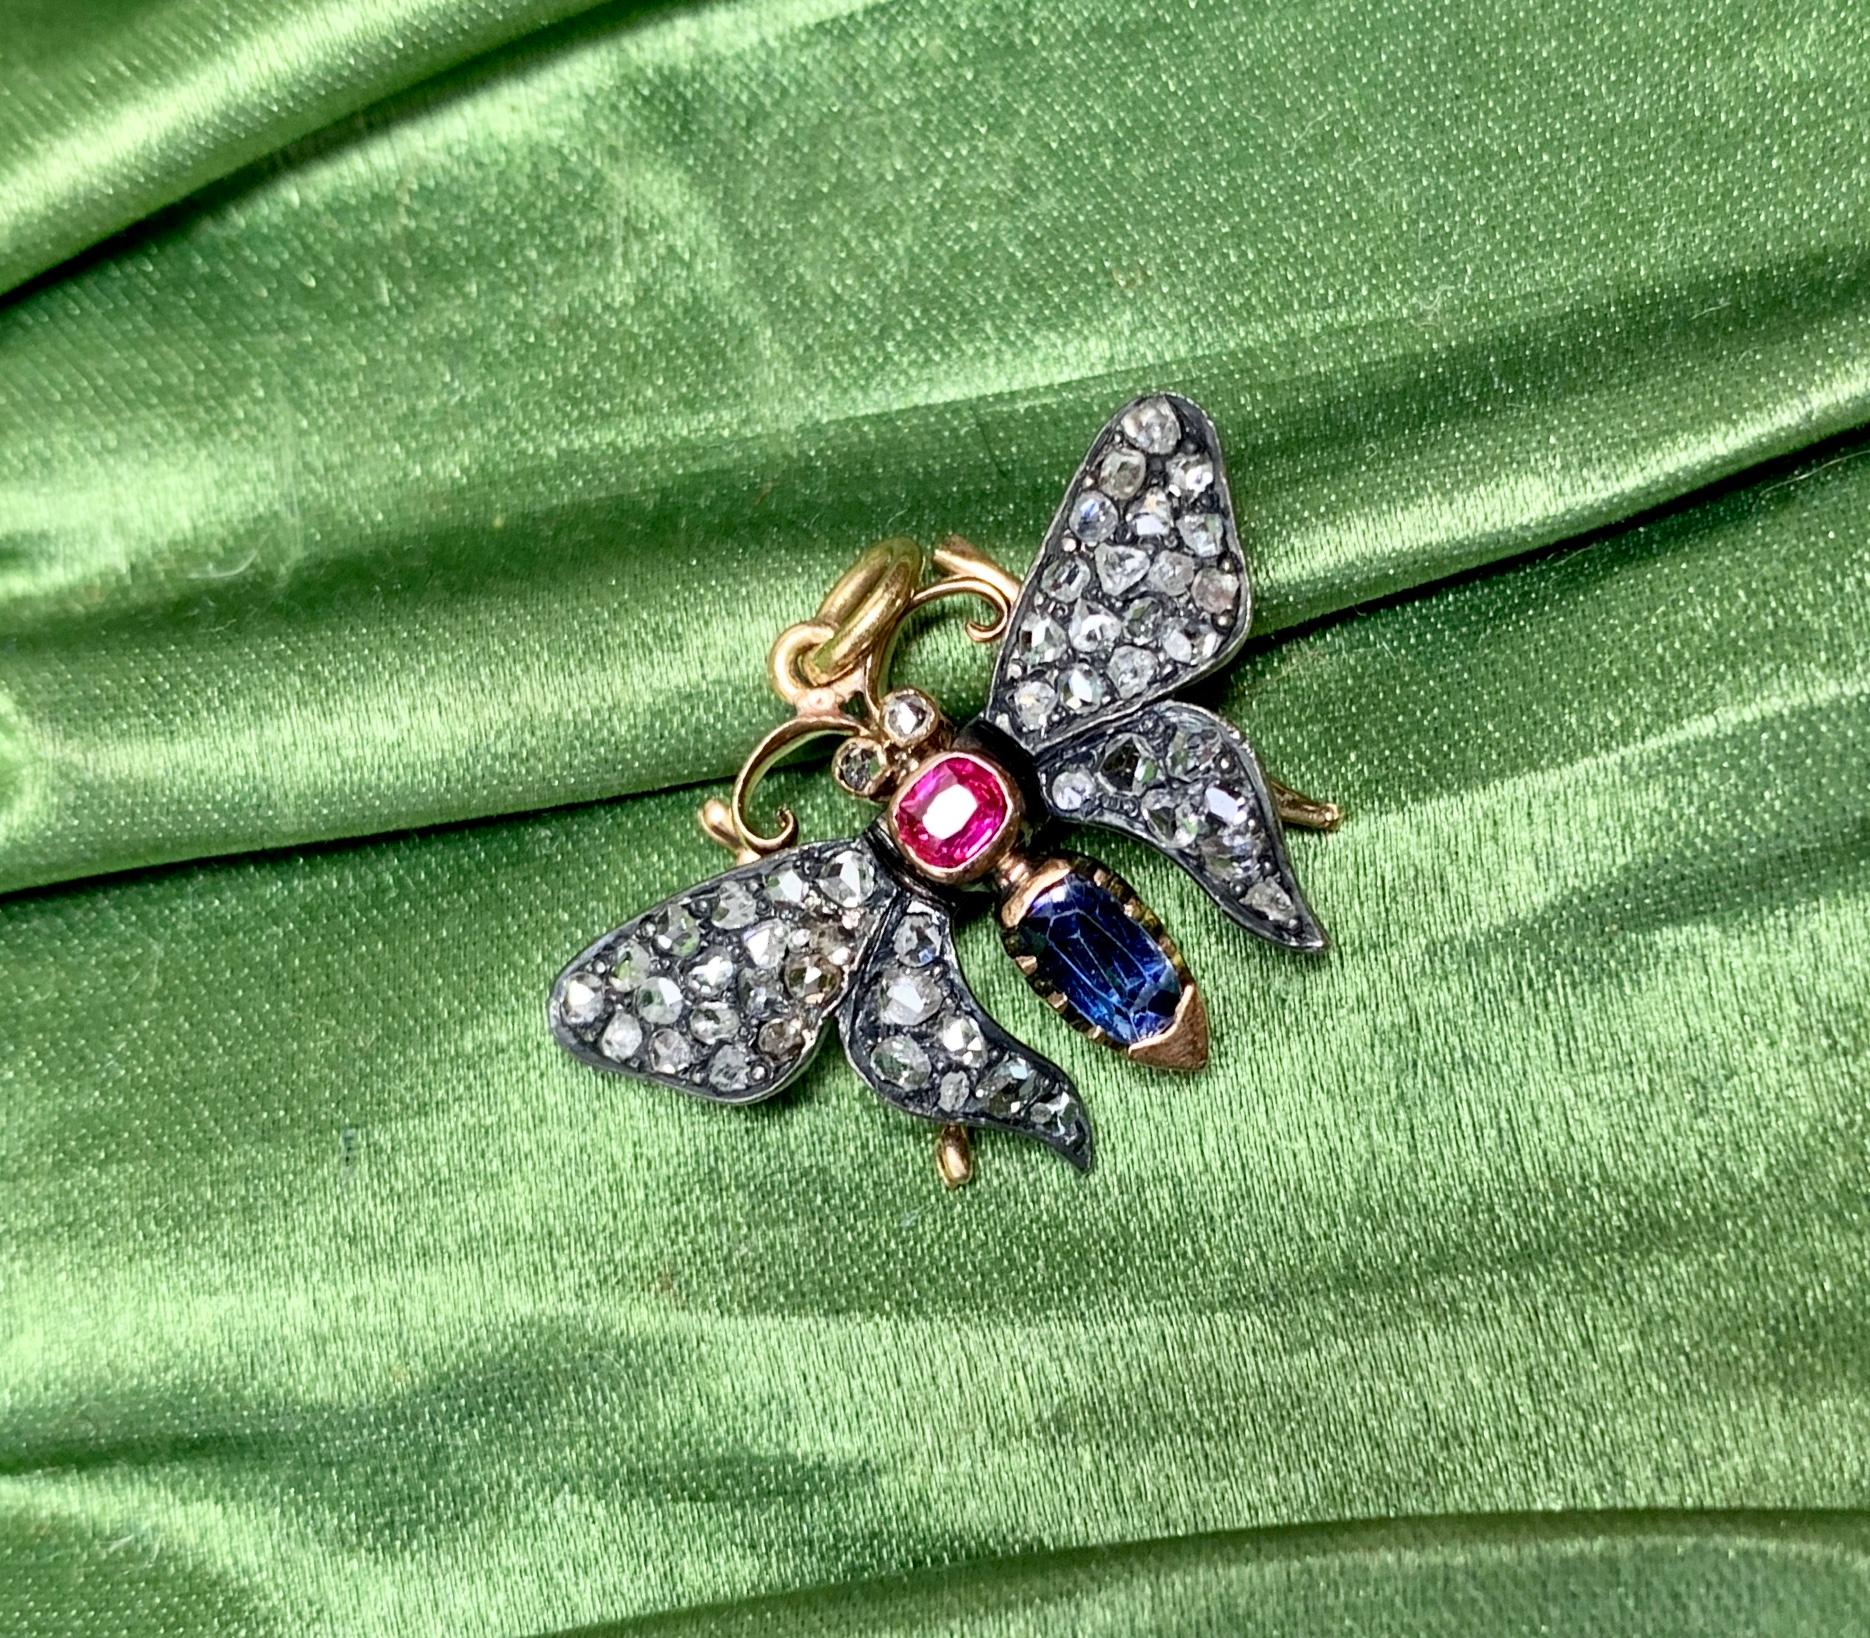 This is a wonderful antique Victorian - Belle Epoque Butterfly Pendant set with Sapphire, Ruby and Rose Cut Diamonds in a gorgeous design in yellow and white Gold.  One of the most beautiful Butterfly Insect Pendants we have seen.  The delicate